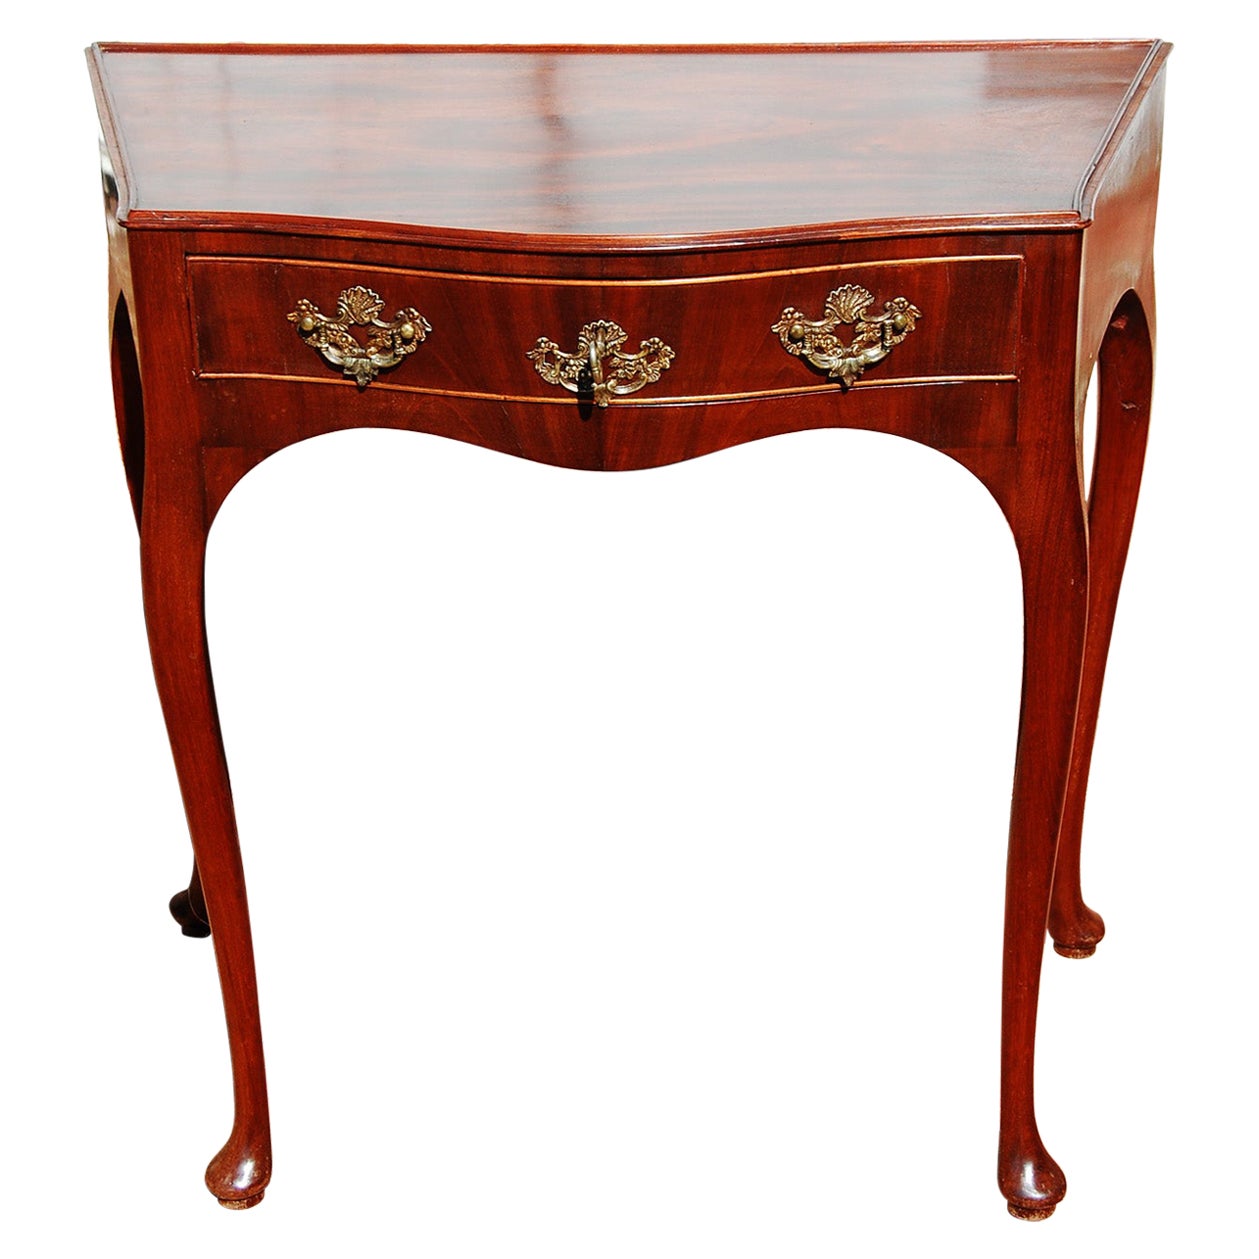 Dutch 18th Century Serpentine Mahogany Sidetable with Drawer and Cabriole Legs